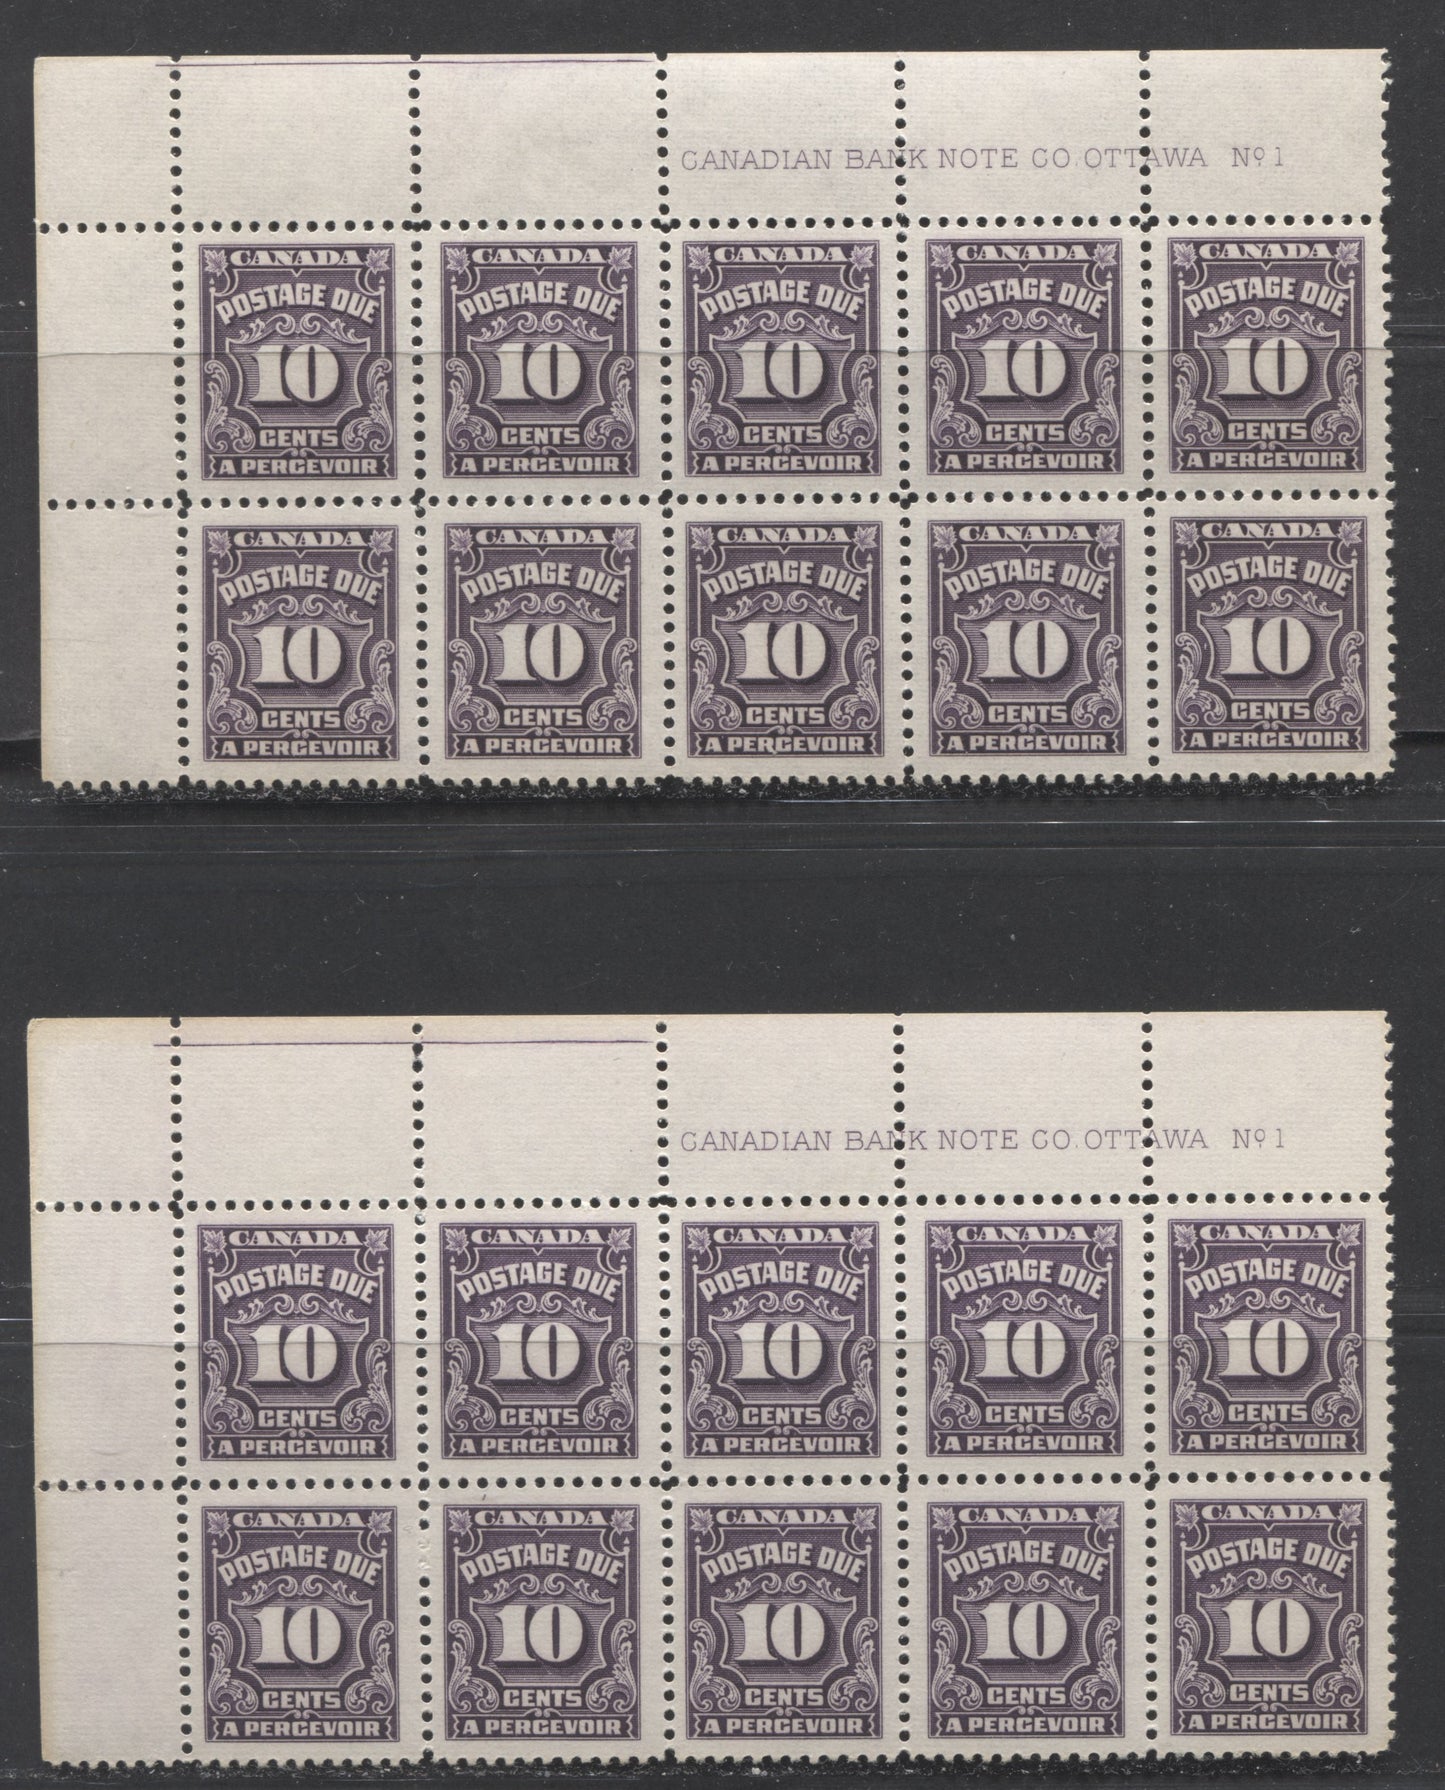 Lot 88 Canada #J20 10c Deep Rose Lilac & Violet, 1935-1965 Fourth Postage Due Issue, 2 VFNH UL Plate 1 Blocks Of 10 On Ribbed Papers With Smooth Shiny Cream Gum & Cream Gum, One Lightly Folded Between Columns 3 & 4